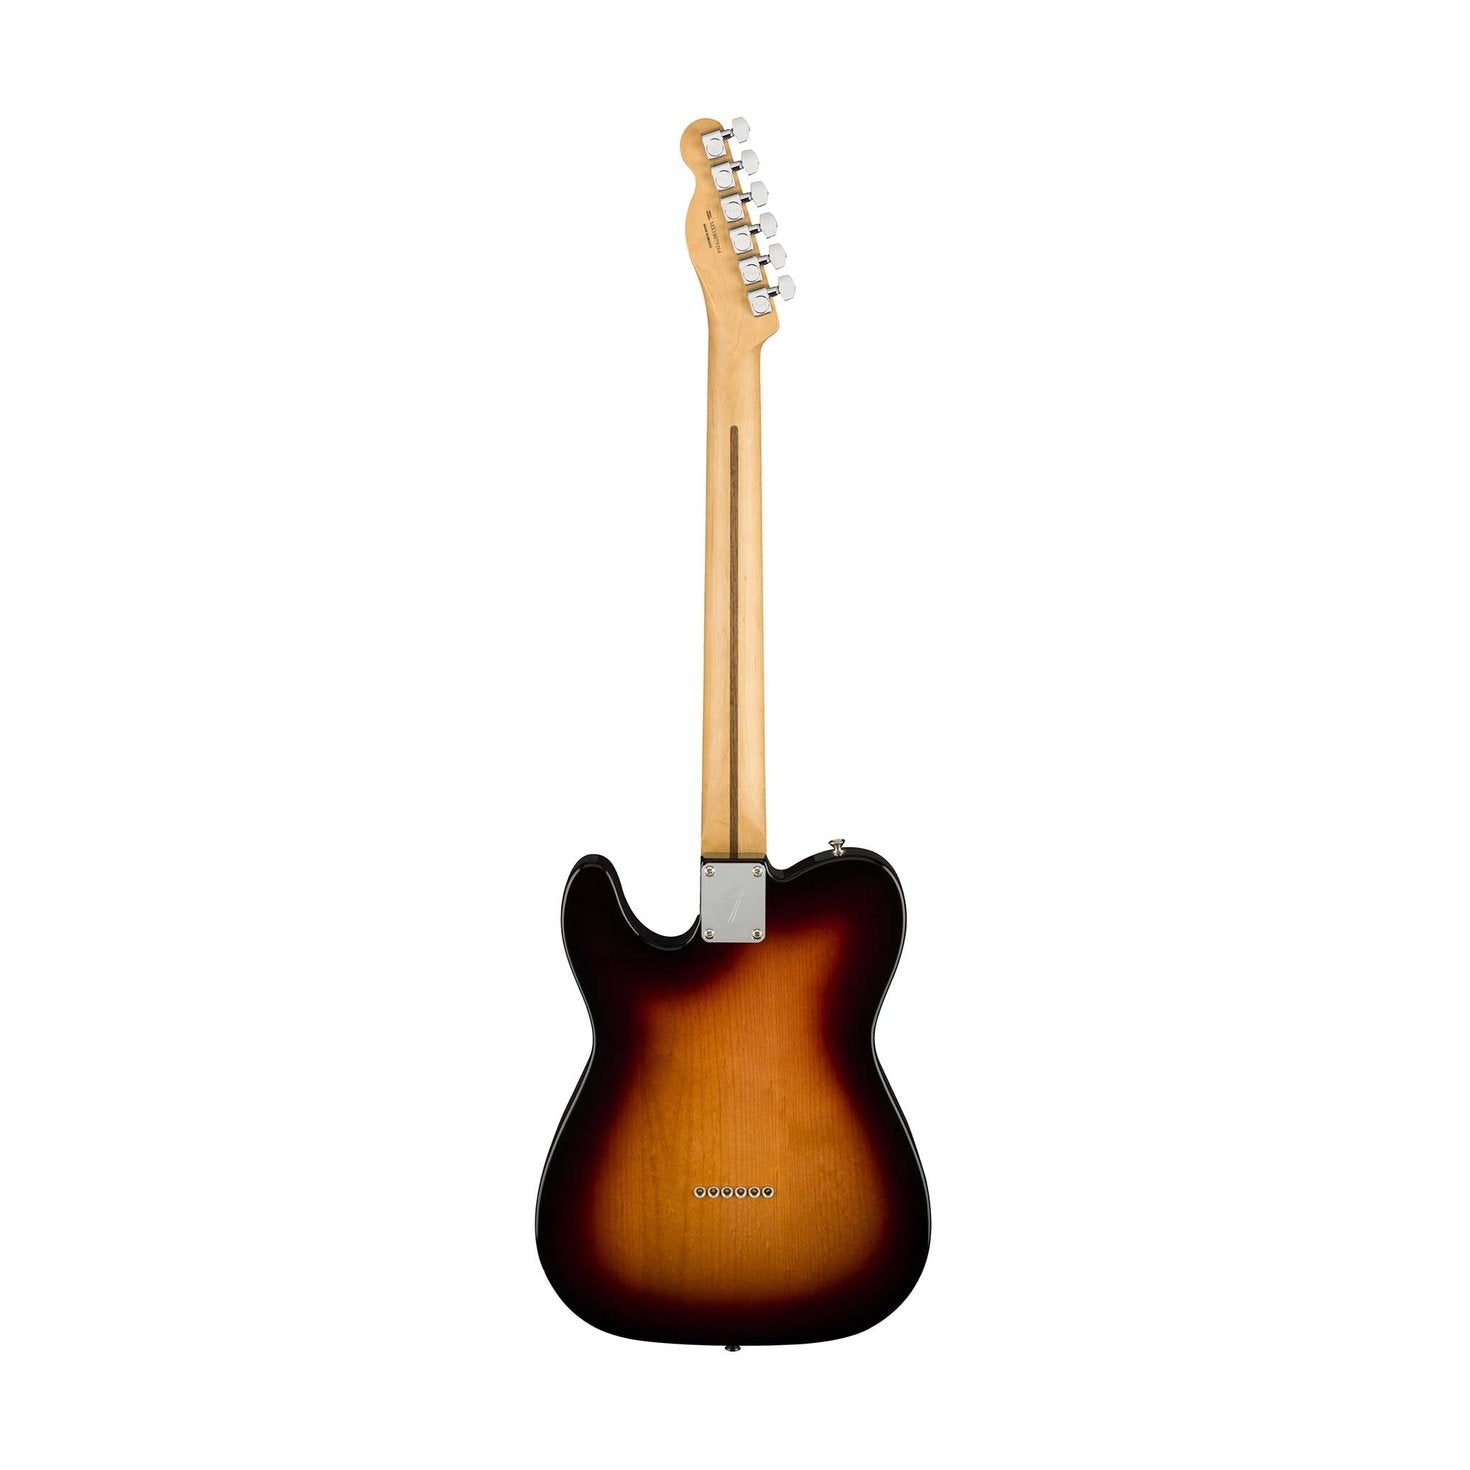 Fender Player Telecaster Electric Guitar, Maple FB, 3-Tone Sunburst, FENDER, ELECTRIC GUITAR, fender-eletric-guitar-f03-014-5212-500, ZOSO MUSIC SDN BHD